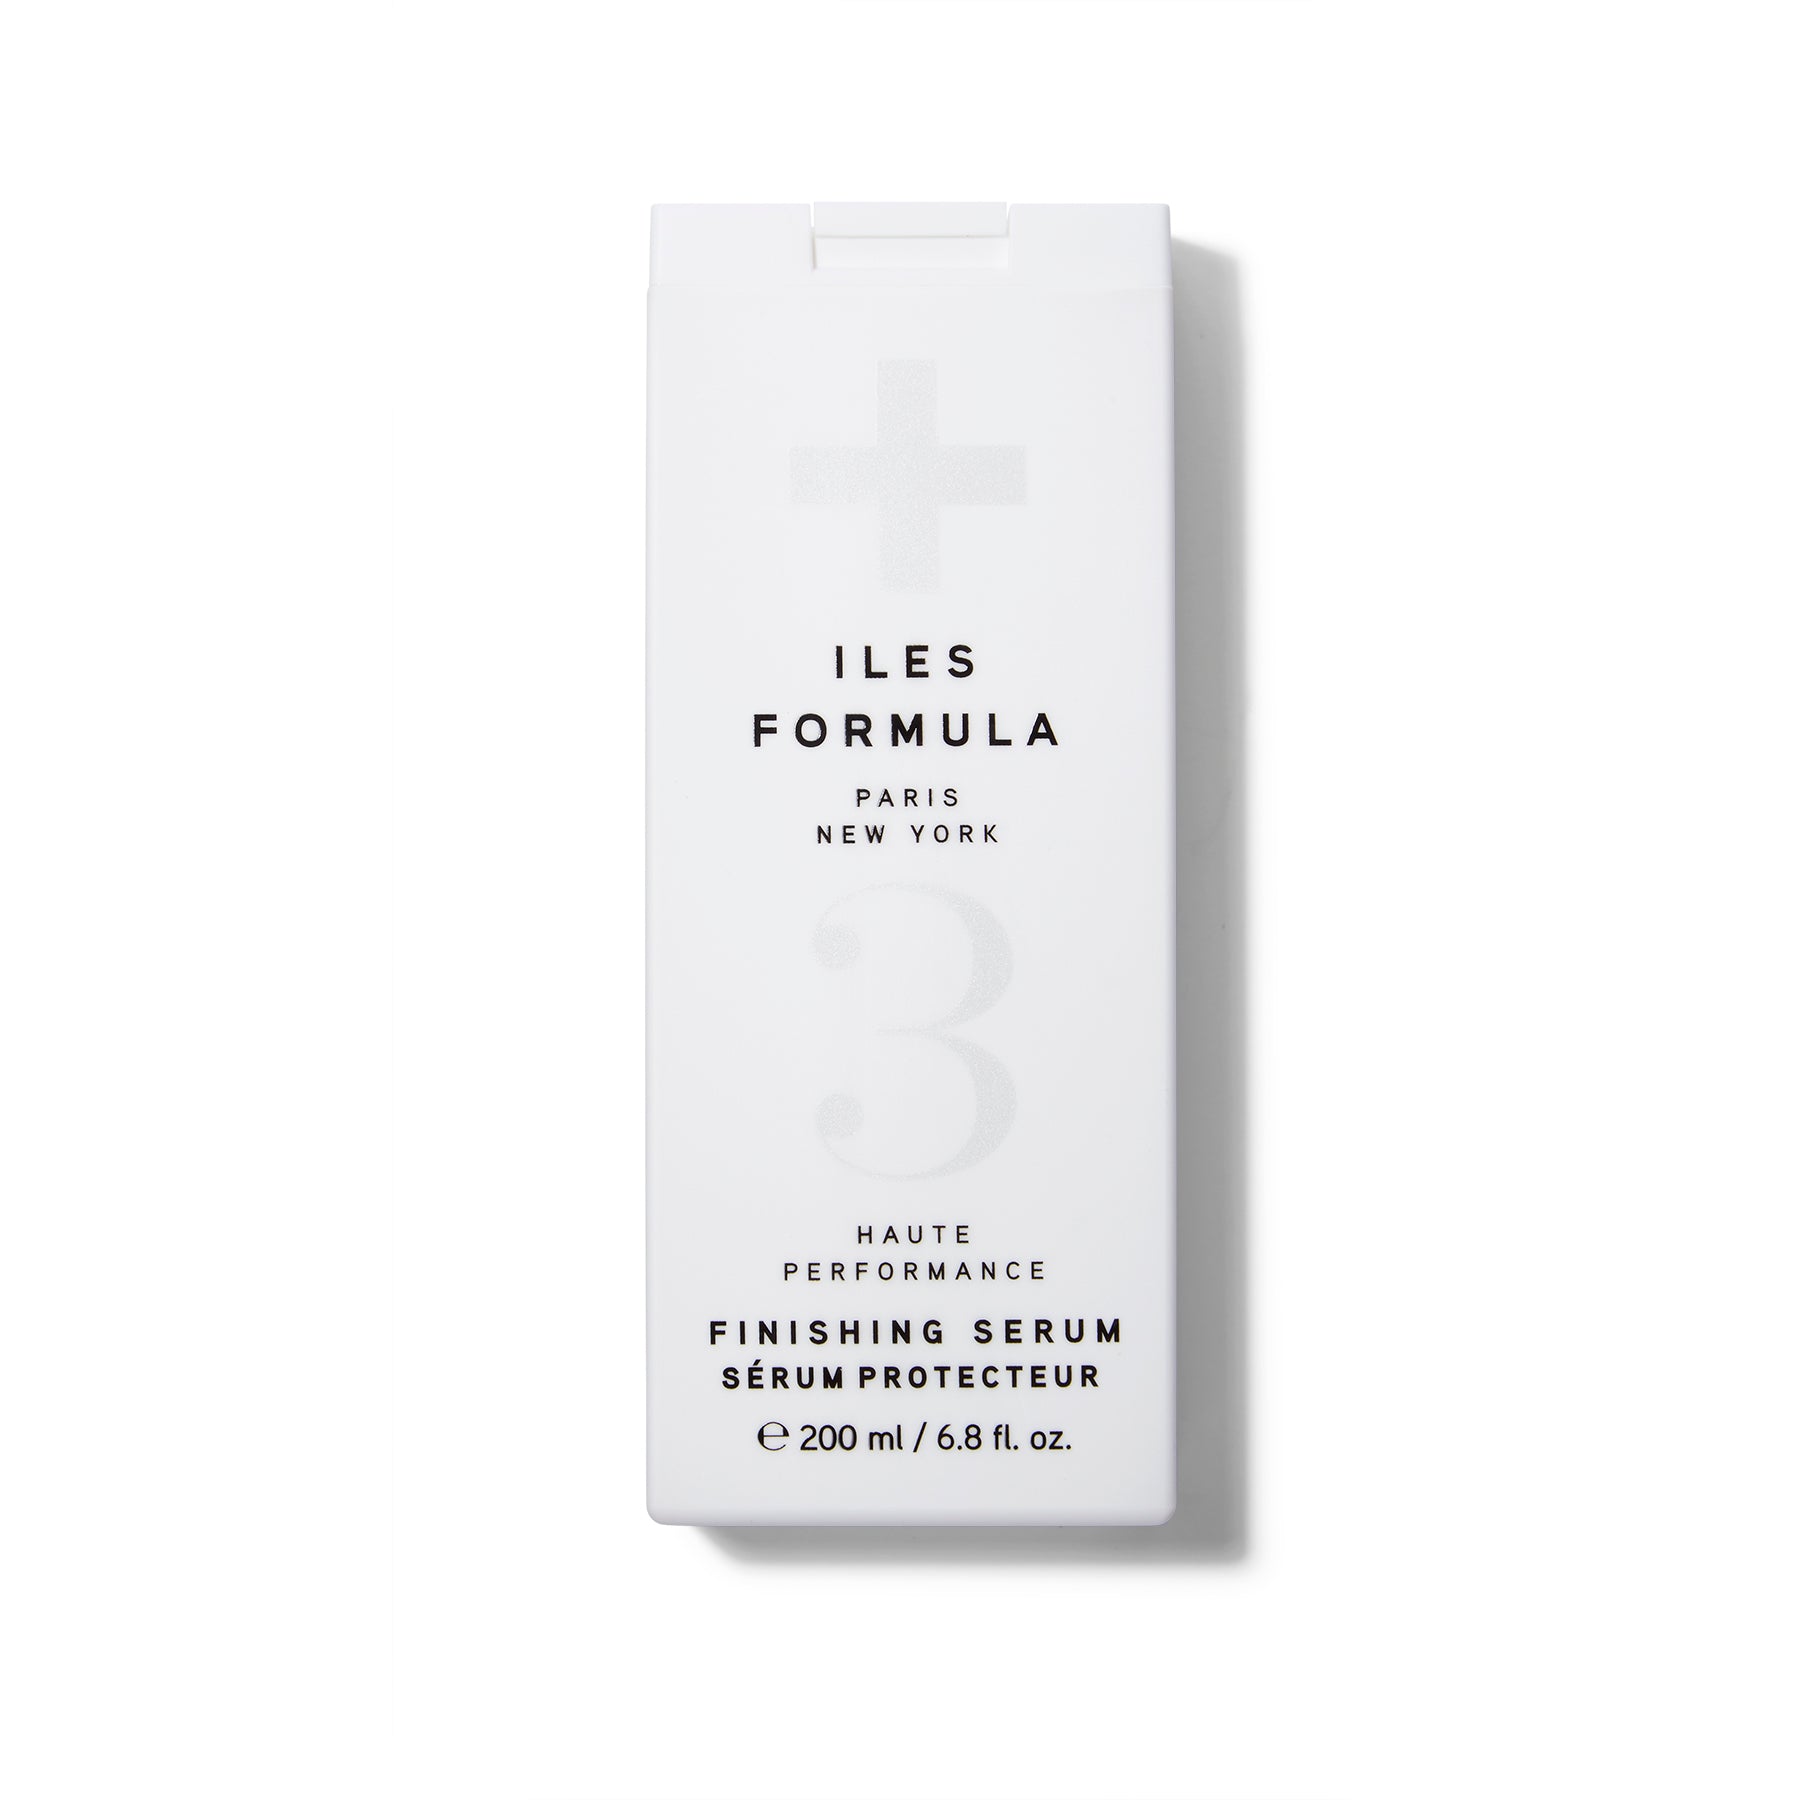 A white rectangular bottle of Iles Formula Finishing Serum with a flip cap. The text is black.